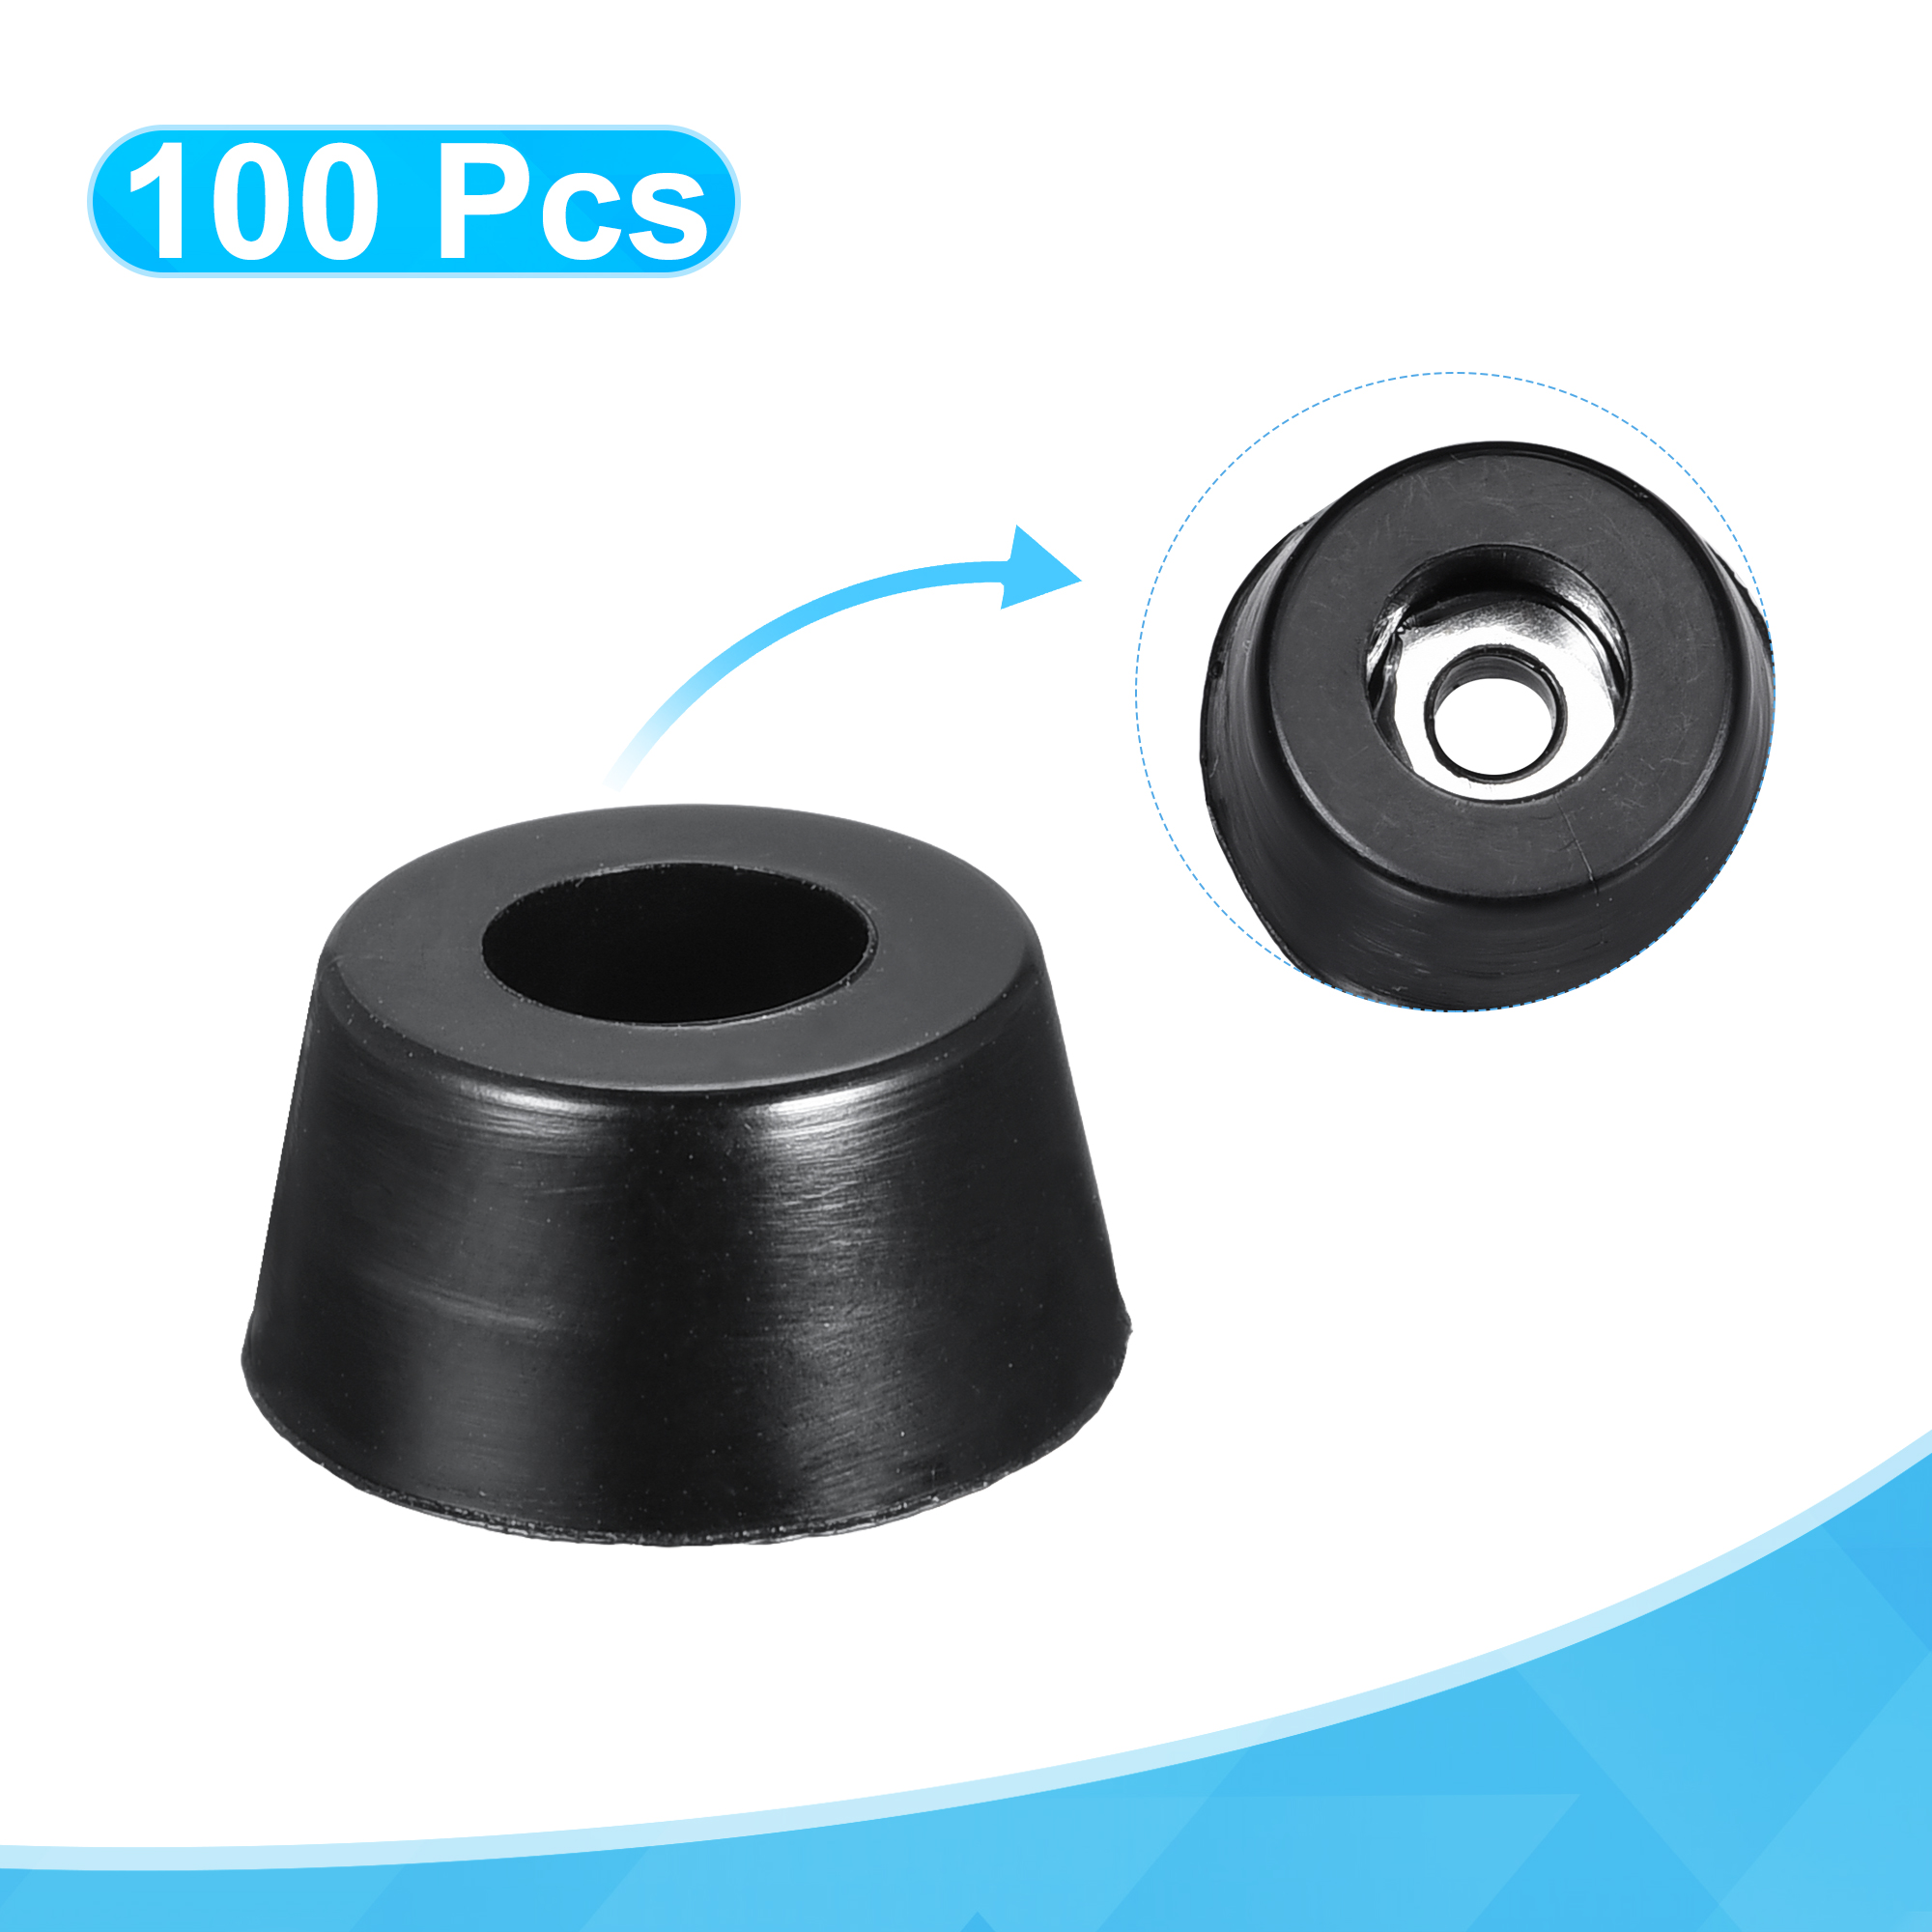 Uxcell 0.59" W x  0.31" H Rubber Bumper Feet, Stainless Steel Screws and Washer 100 Pack - image 4 of 5